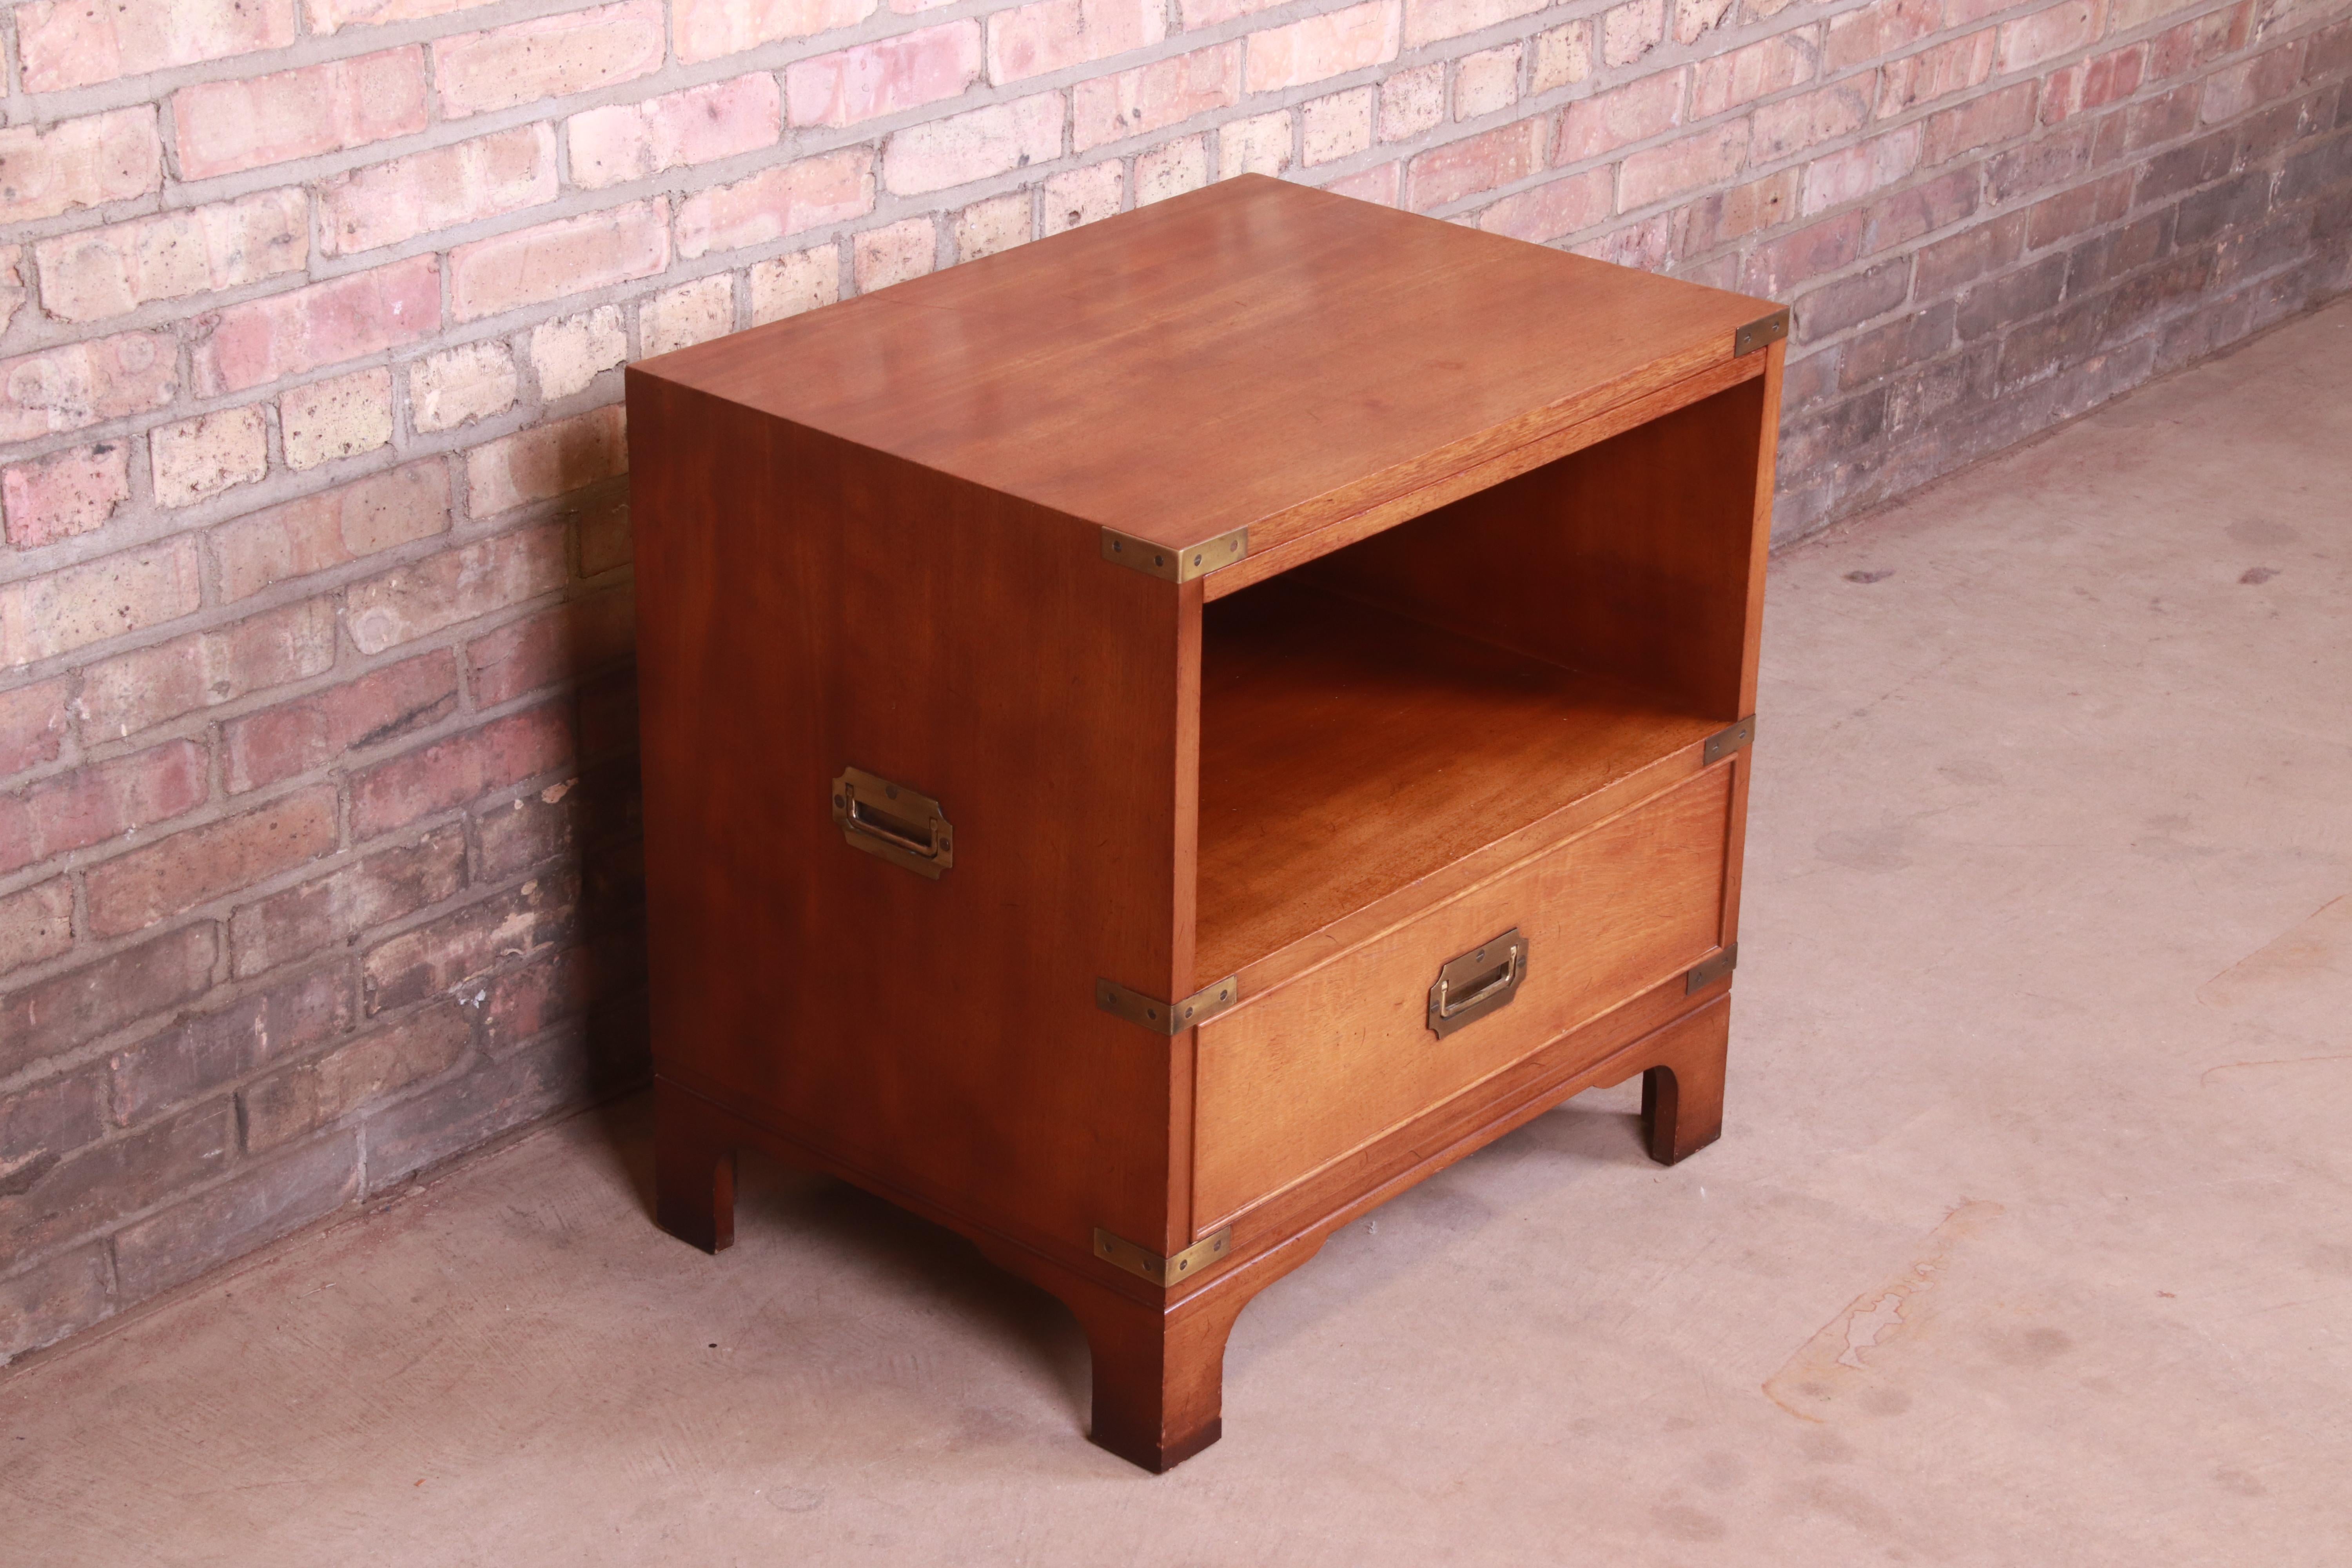 20th Century Hollywood Regency Campaign Style Mahogany Nightstand by Beacon Hill